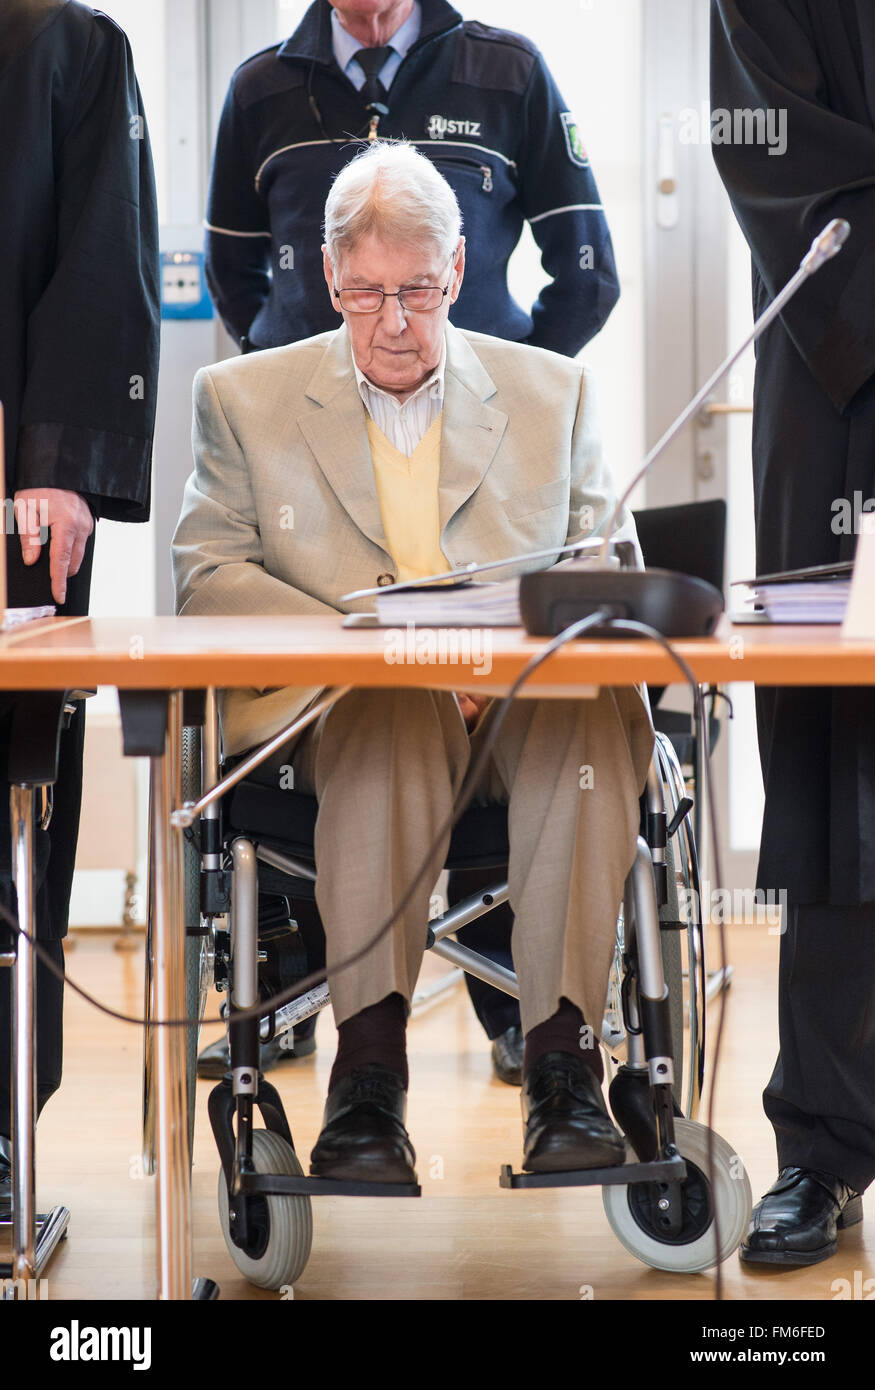 Detmold, Germany. 11th Mar, 2016. Defendant Reinhold Hanning attending the continuation of his trial in Detmold, Germany, 11 March 2016. Reinhold Hanning, a 94-year-old World War II SS guard is facing a charge of being an accessory to at least 170,000 murders at Auschwitz concentration camp. Prosecutors state that he was a member of the SS 'Totenkopf' (Death's Head) Division and that he was stationed at the Nazi regime's death camp between early 1943 and June 1944. Photo: Bernd Thissen/dpa/Alamy Live News Stock Photo